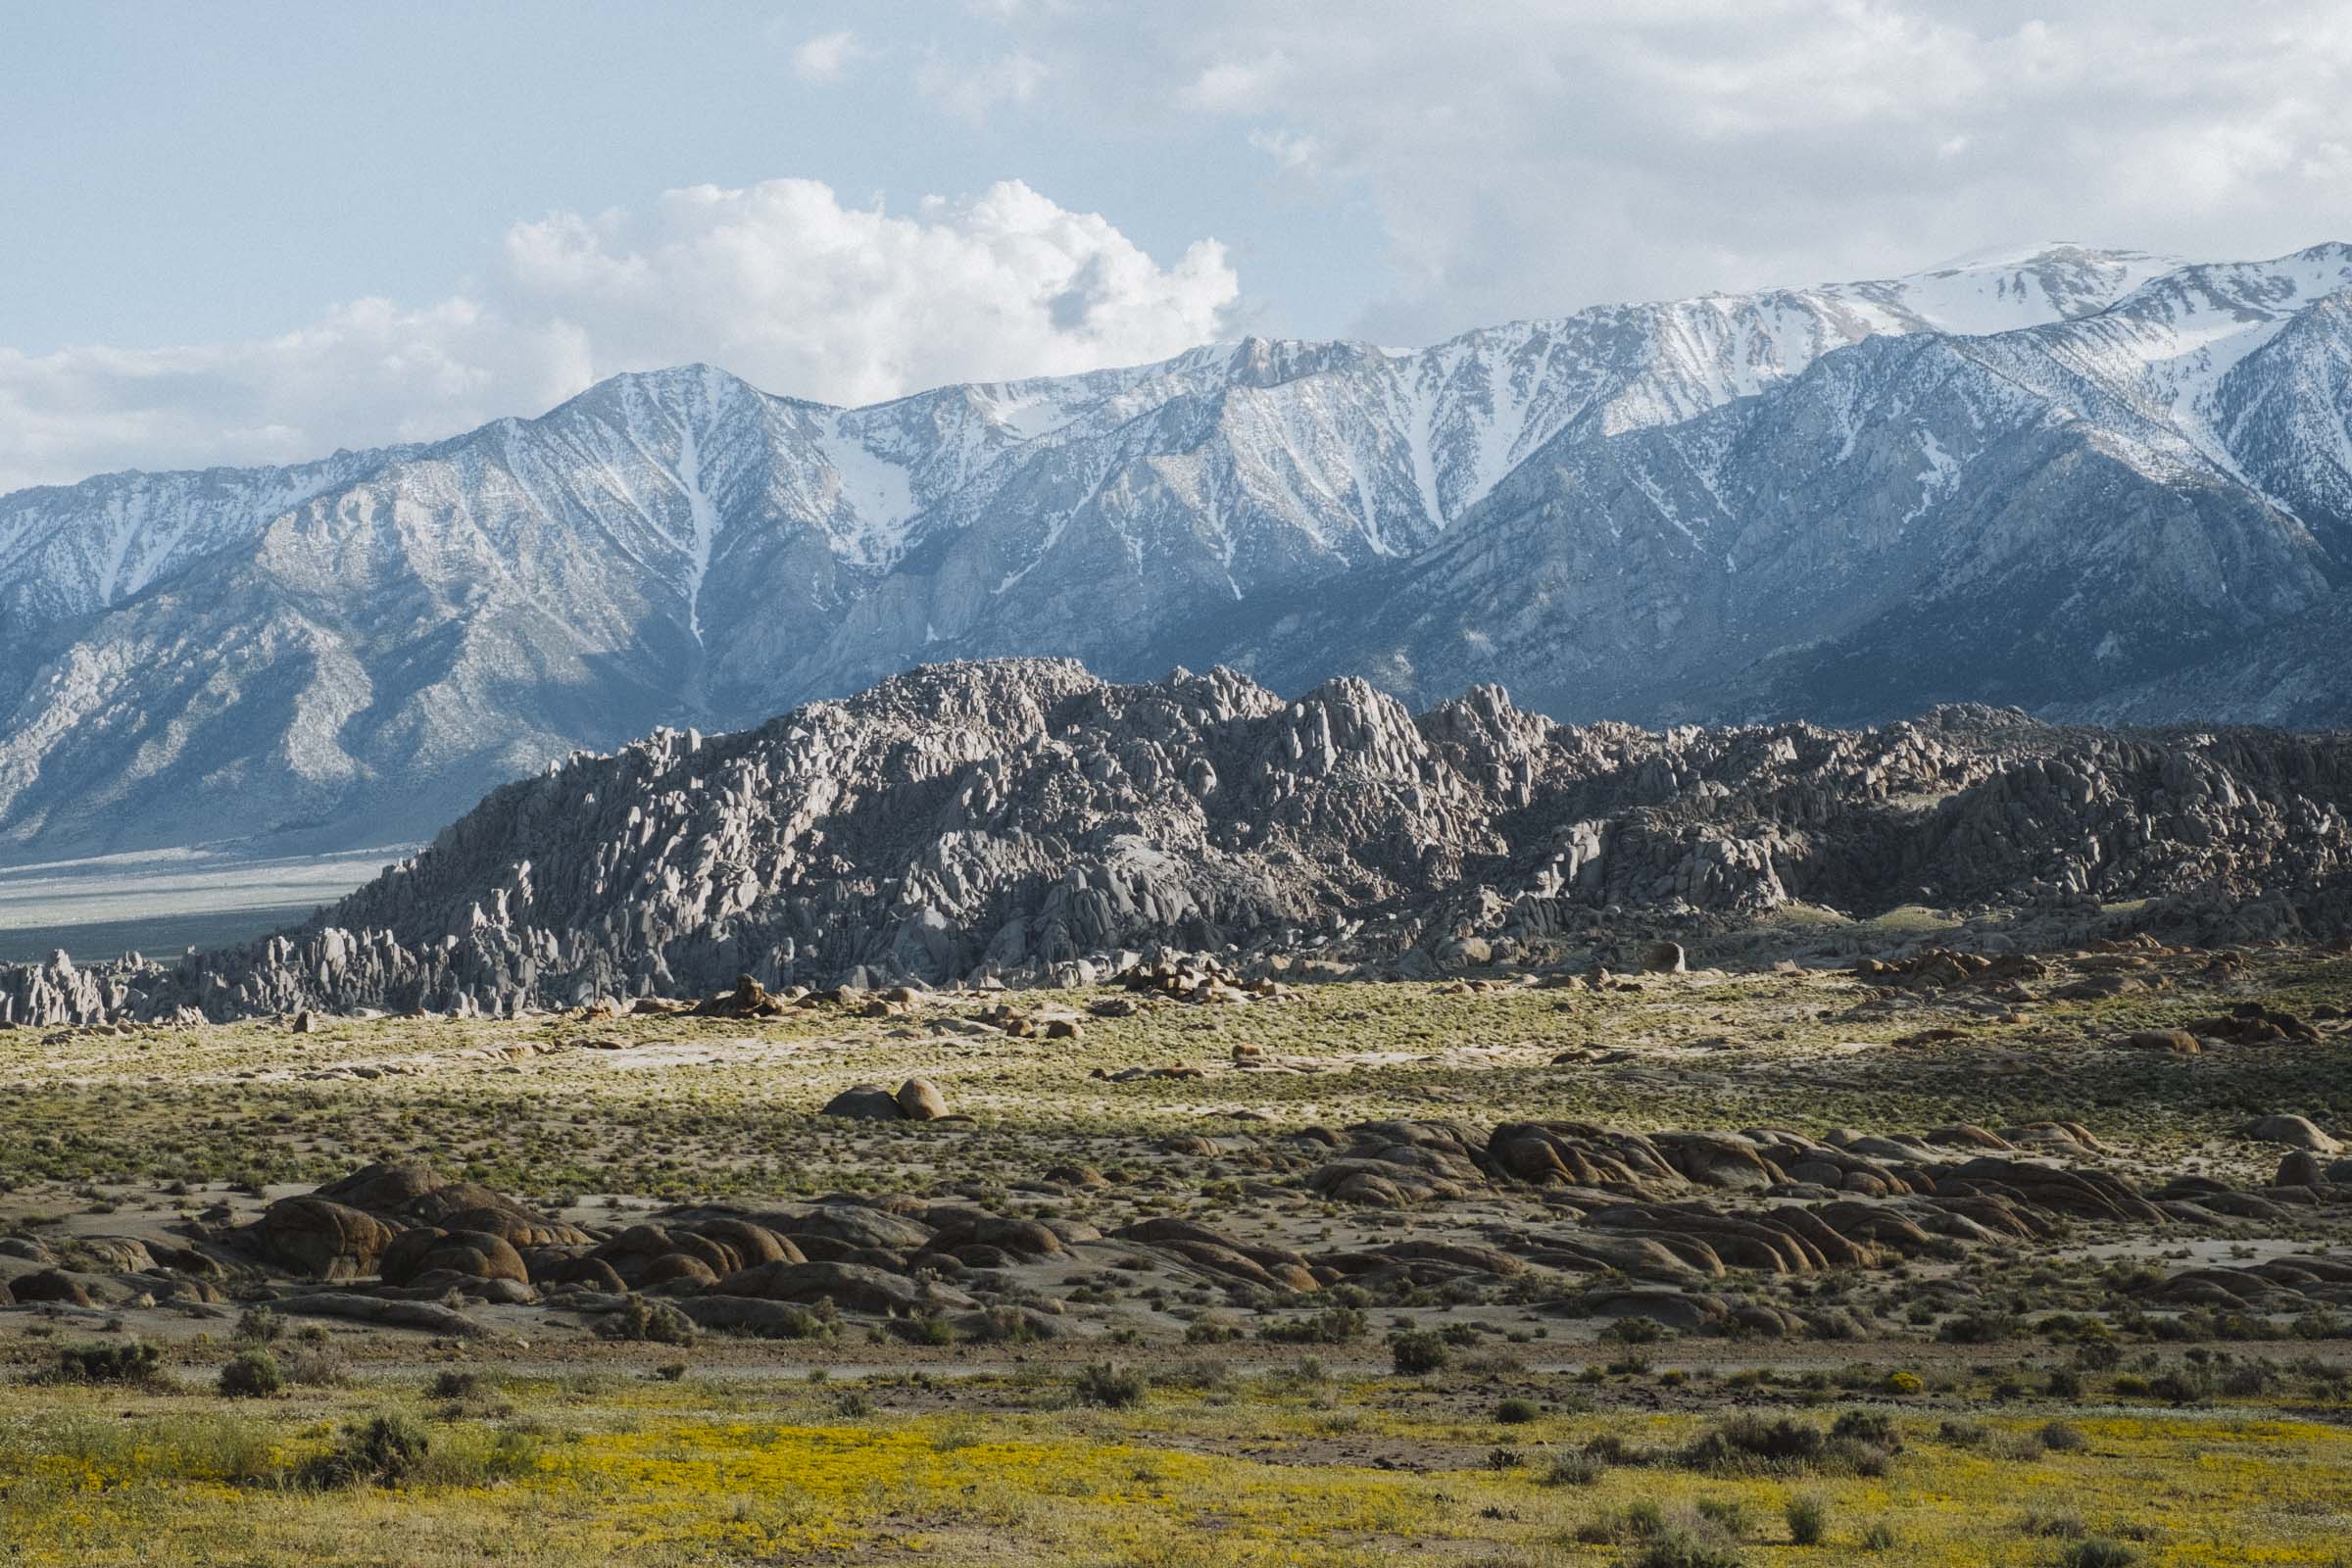 Looking out over the Alabama Hills with the snow-capped Sierras towering above